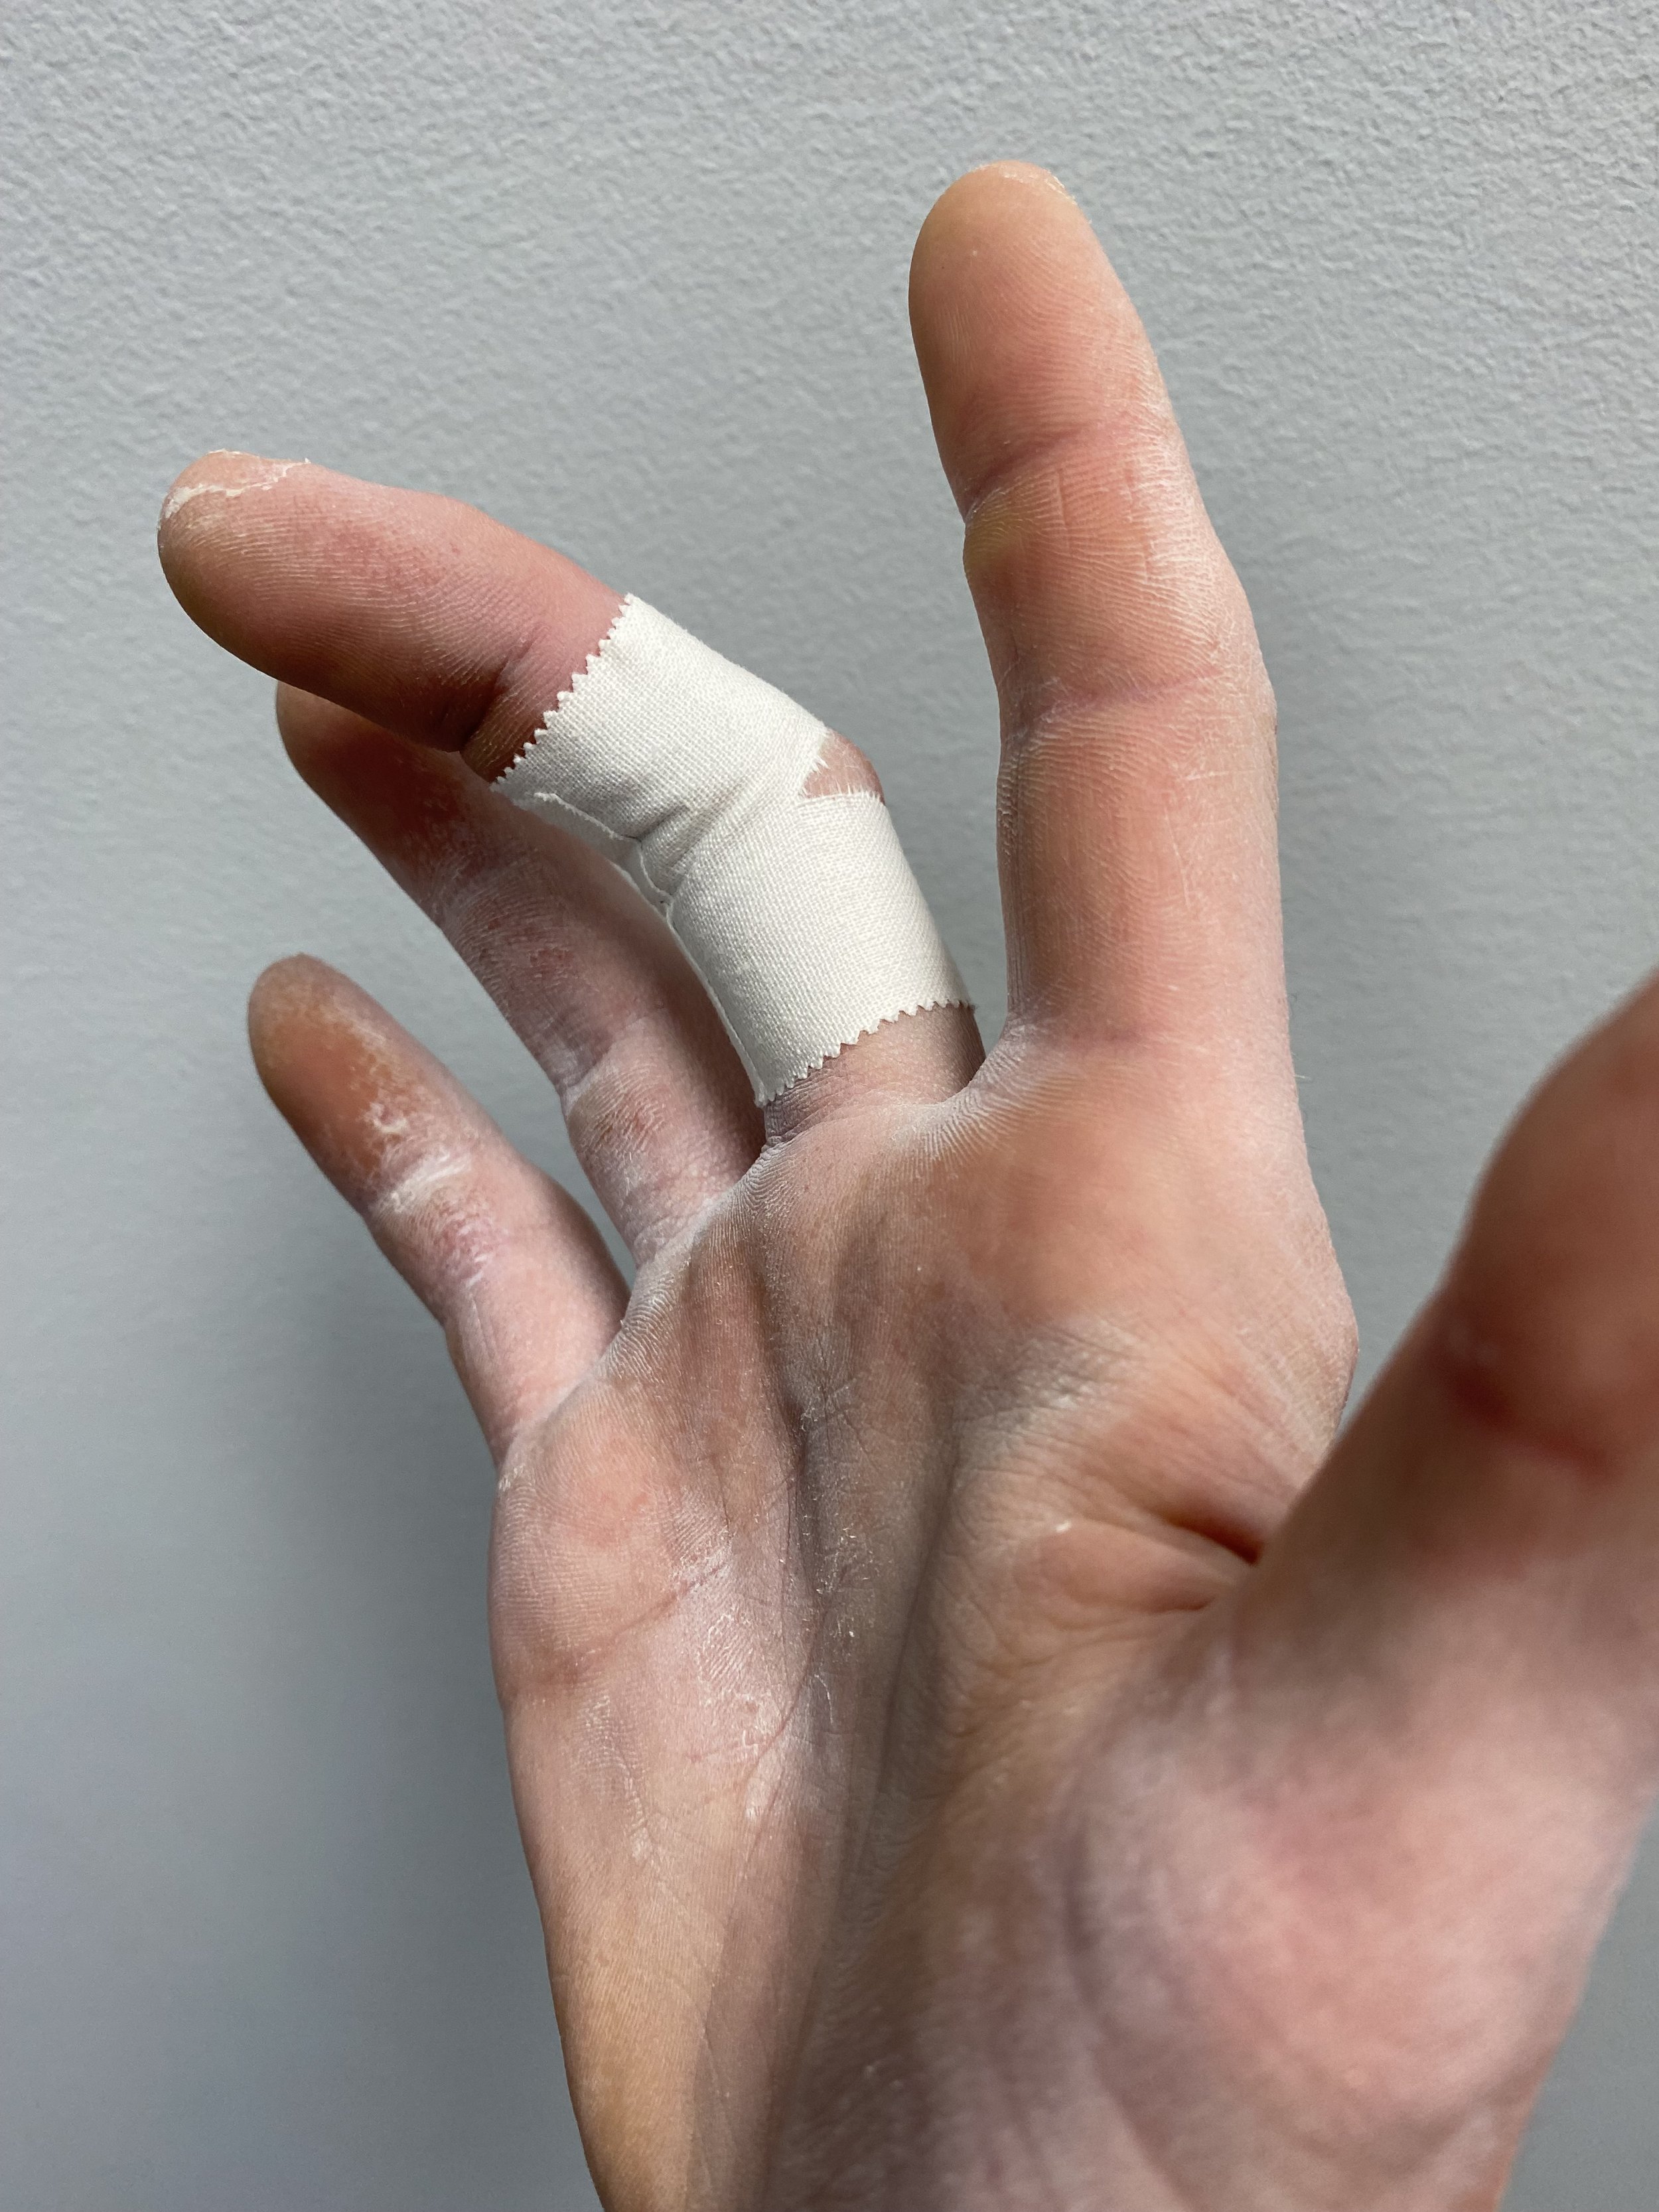 Does Finger Taping Improve Finger Strength In Climbers? - Mend Colorado